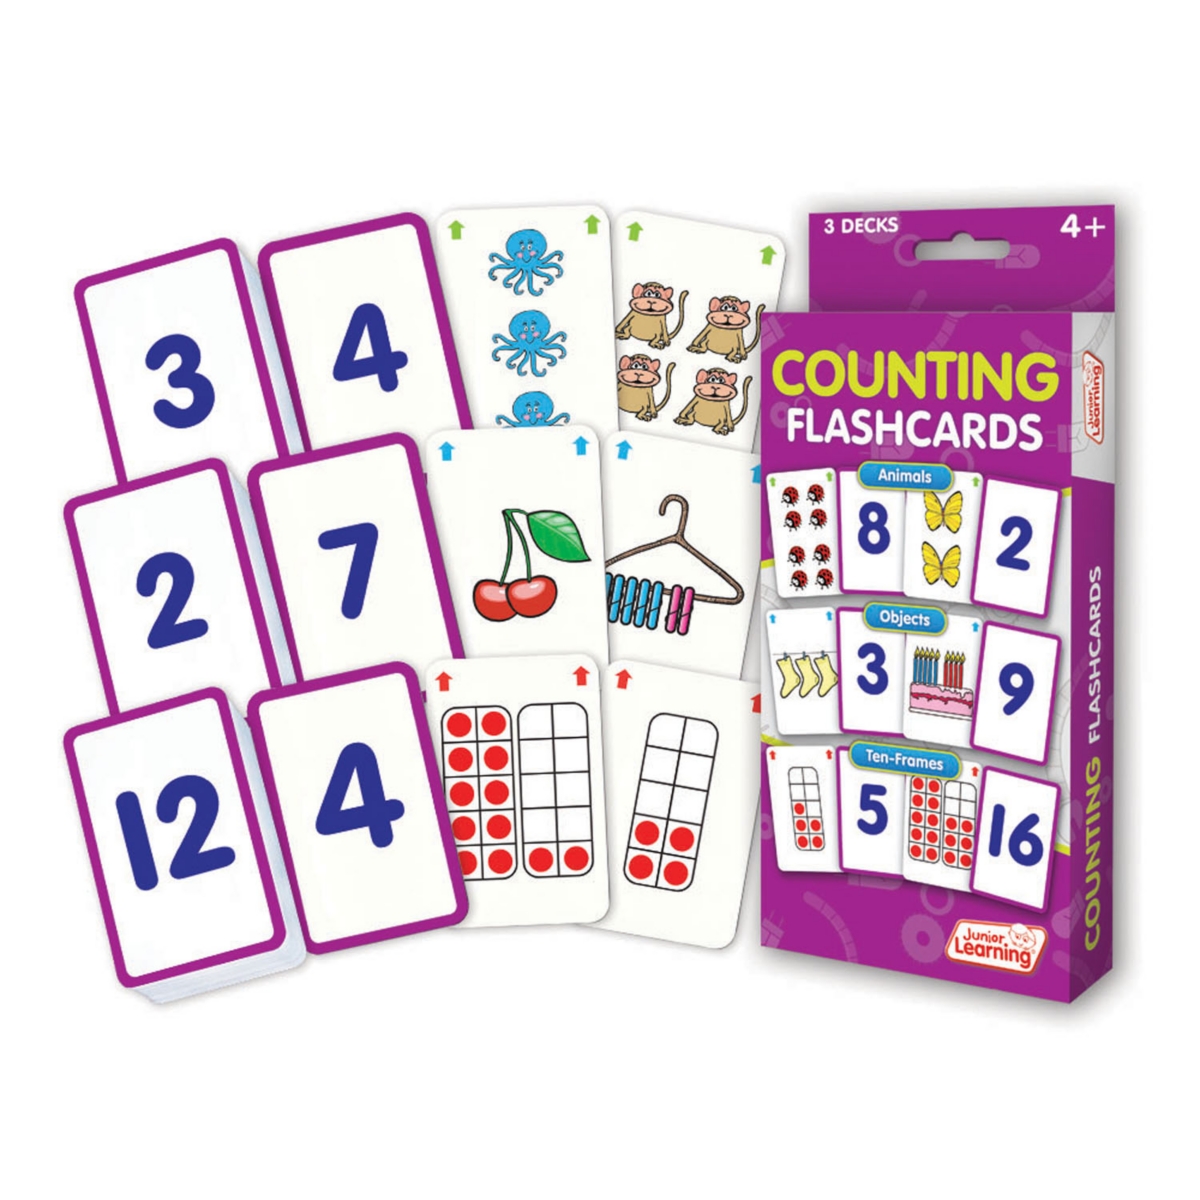 Junior Learning Kids' Counting Flashcards Animals, Objects And Ten Frames In Multi